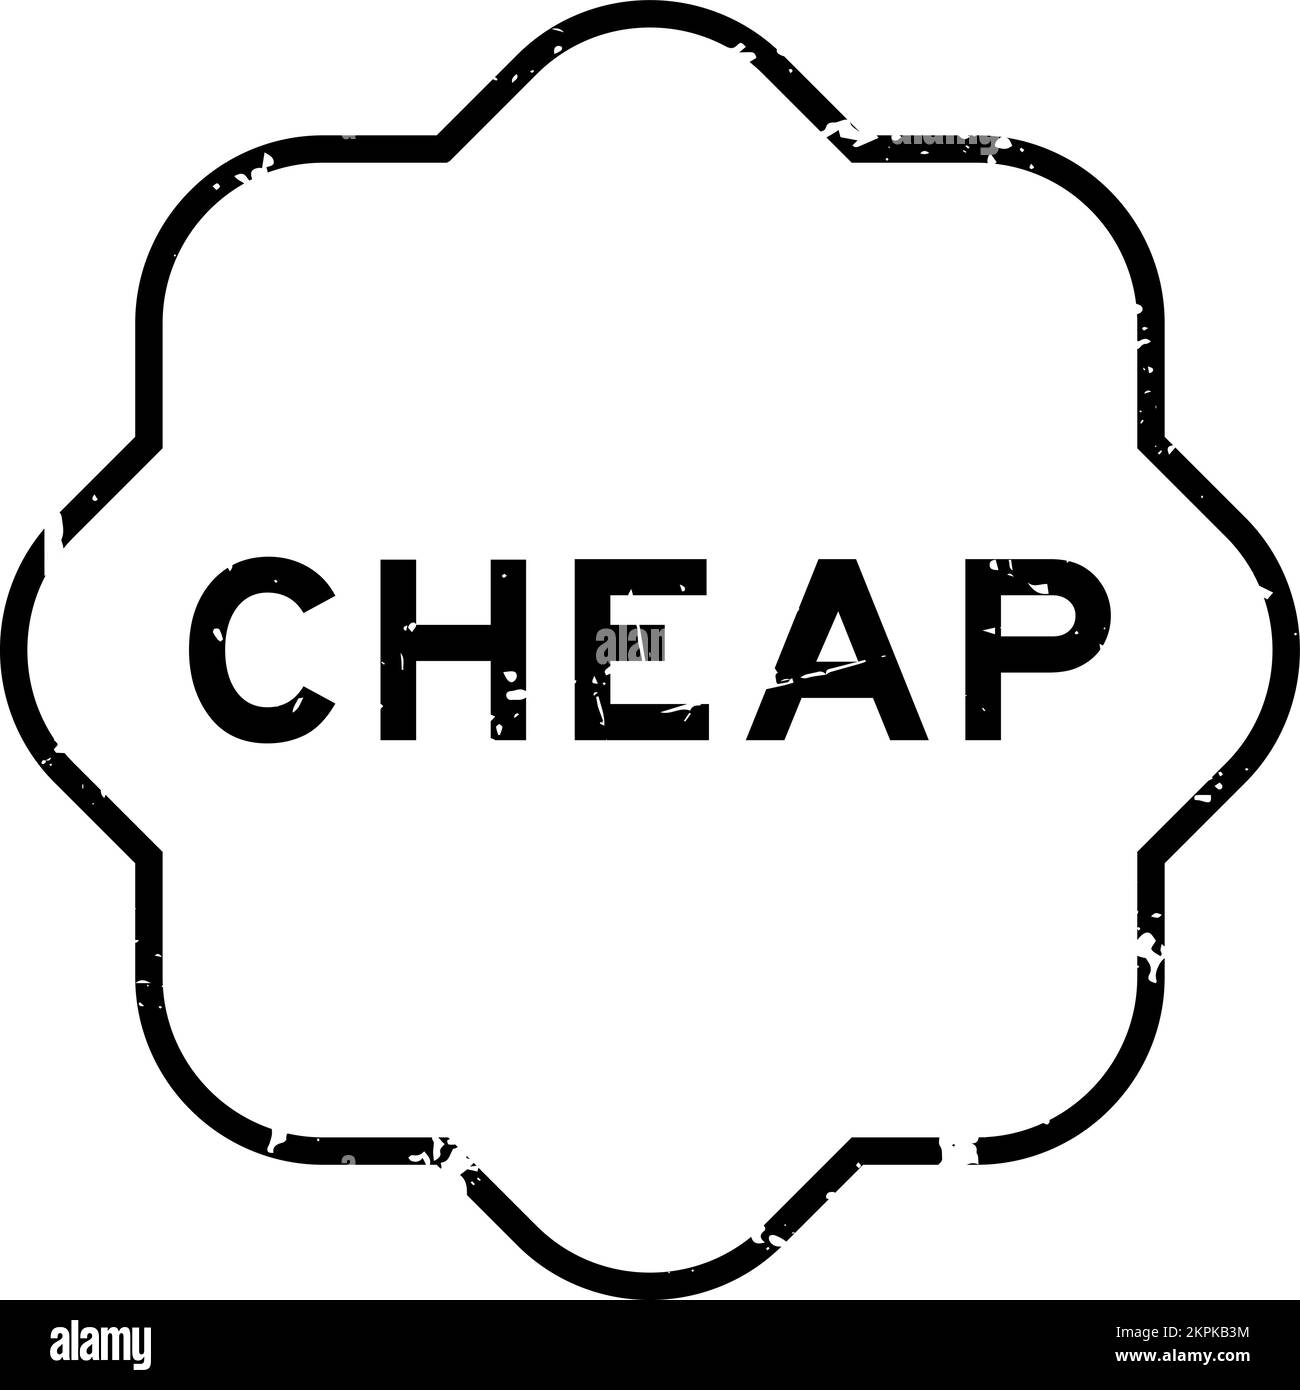 Grunge black cheap word rubber seal stamp on white background Stock Vector